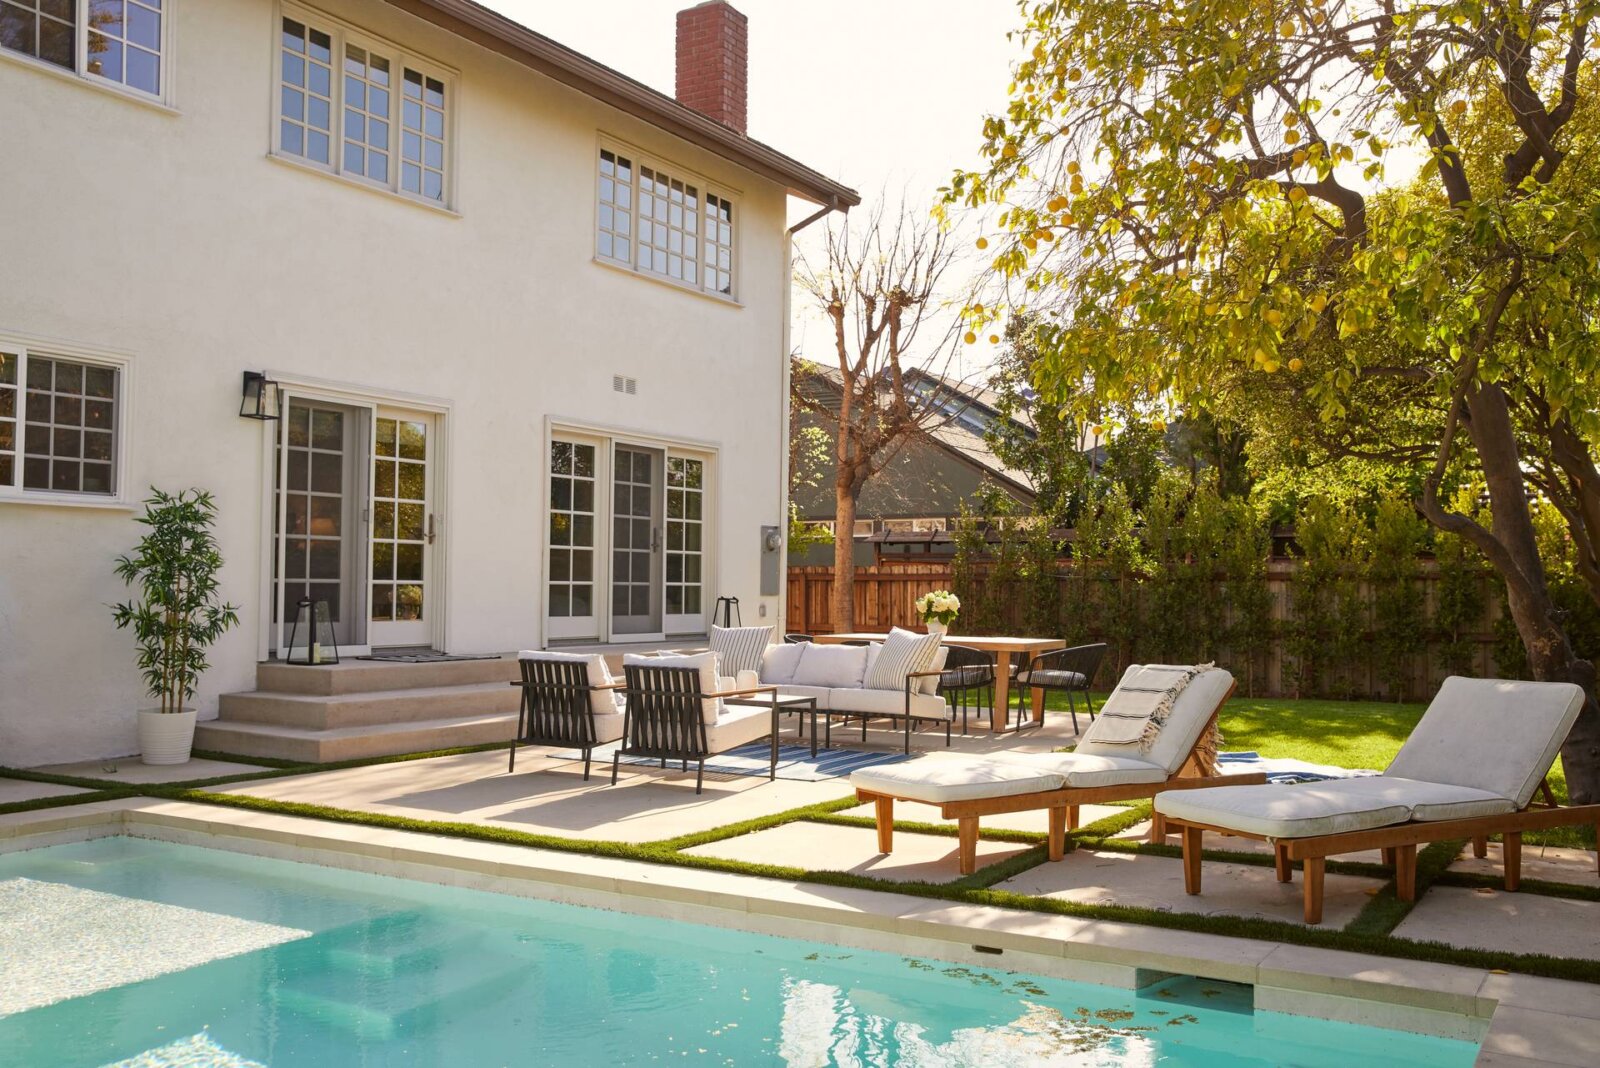 Los Angeles backyard with pool, lounge chairs, and dining area